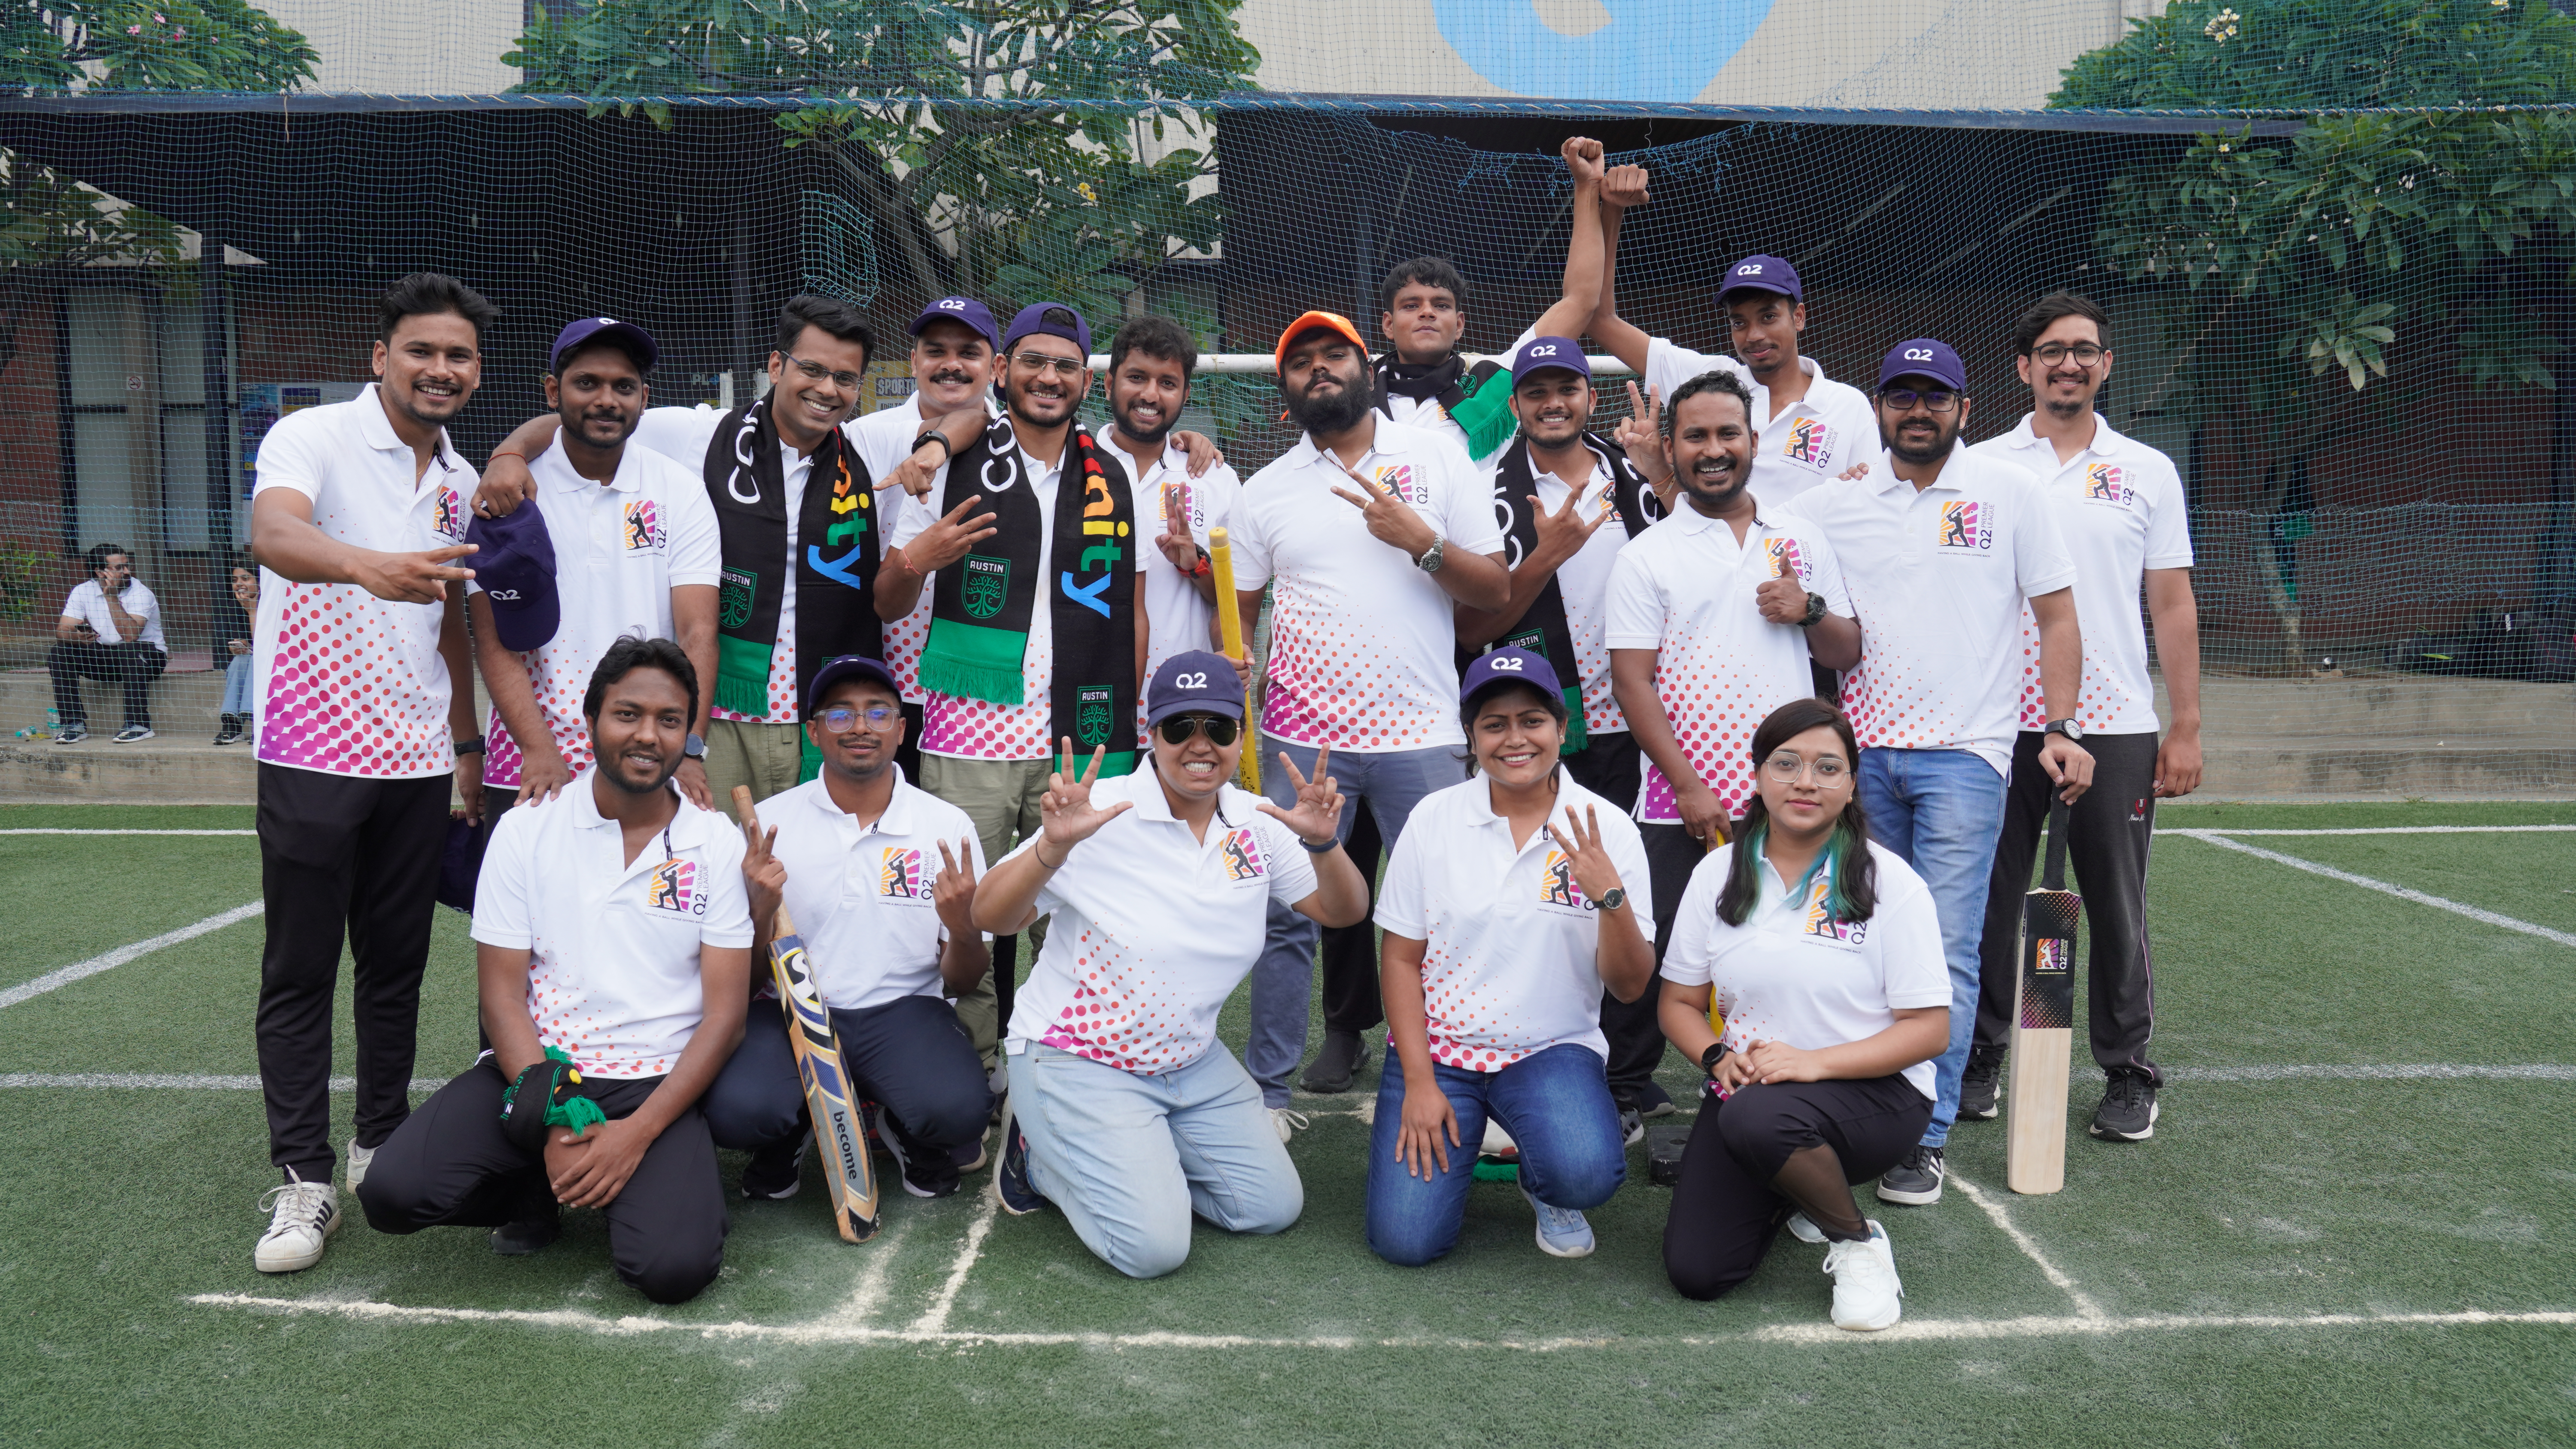 Team members from Q2’s Bangalore office compete in a cricket tournament.